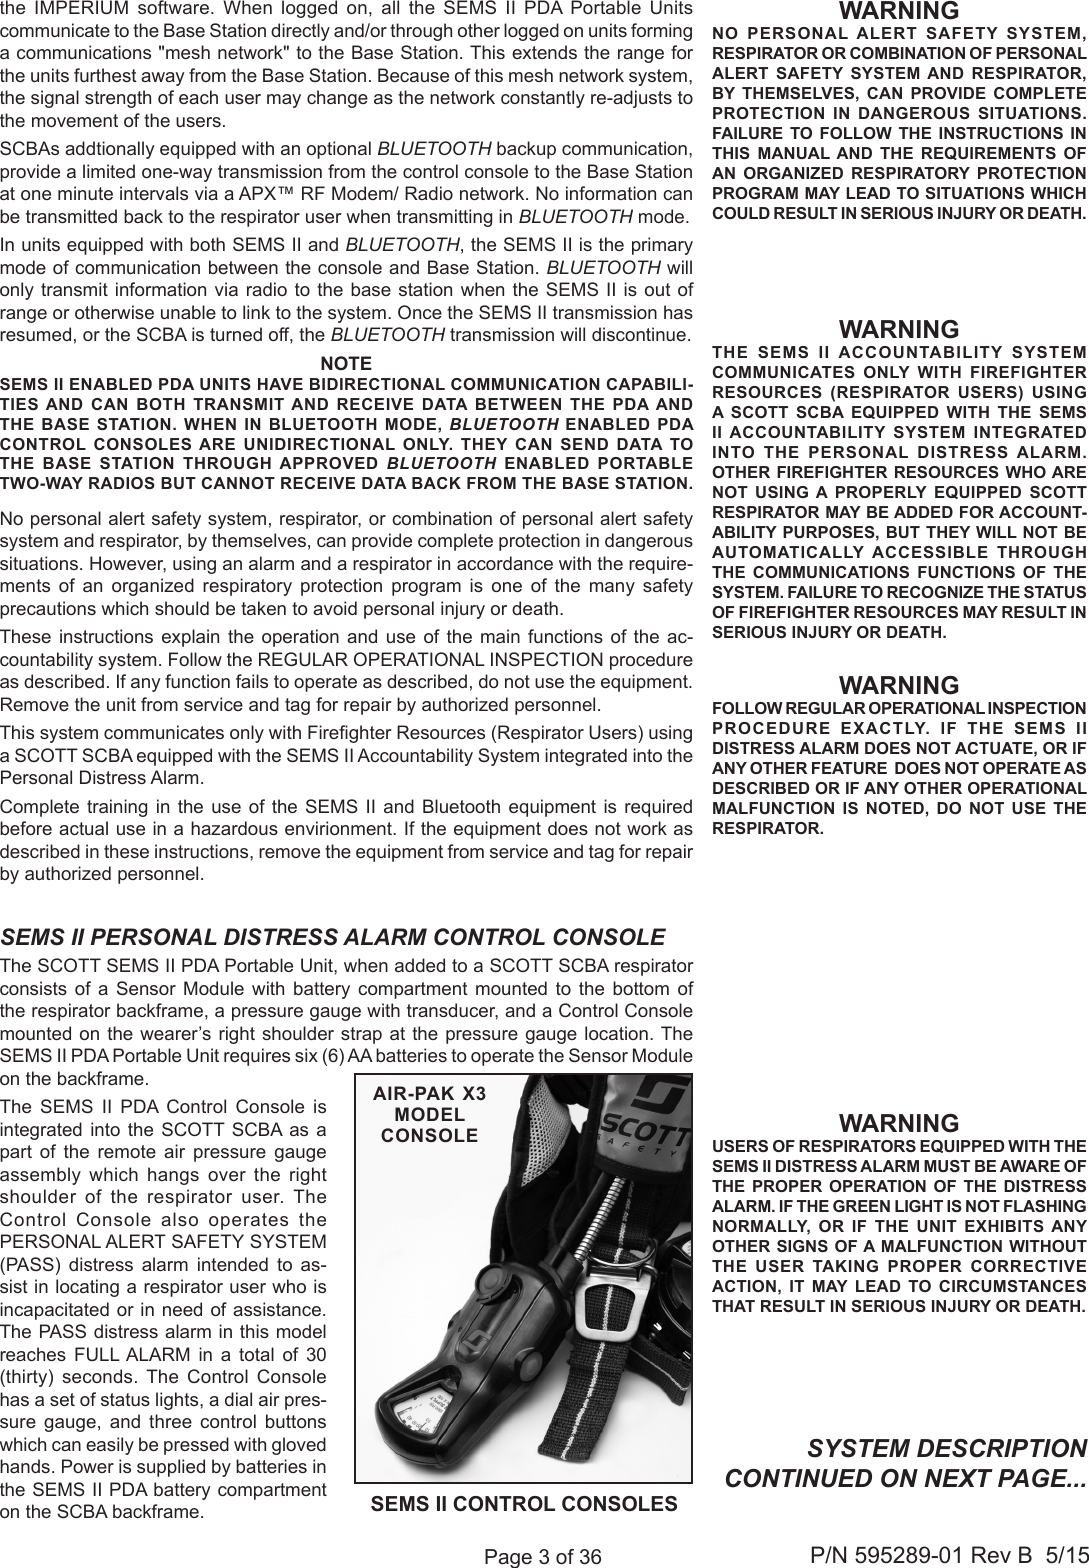 Page 3 of 36P/N 595289-01 Rev B  5/15WARNINGNO PERSONAL ALERT SAFETY SYSTEM, RESPIRATOR OR COMBINATION OF PERSONAL ALERT SAFETY SYSTEM AND RESPIRATOR, BY THEMSELVES, CAN PROVIDE COMPLETE PROTECTION IN DANGEROUS SITUATIONS. FAILURE TO FOLLOW THE INSTRUCTIONS IN THIS MANUAL AND THE REQUIREMENTS OF AN ORGANIZED RESPIRATORY PROTECTION PROGRAM MAY LEAD TO SITUATIONS WHICH COULD RESULT IN SERIOUS INJURY OR DEATH.WARNINGUSERS OF RESPIRATORS EQUIPPED WITH THE SEMS II DISTRESS ALARM MUST BE AWARE OF THE PROPER OPERATION OF THE DISTRESS ALARM. IF THE GREEN LIGHT IS NOT FLASHING NORMALLY, OR IF THE UNIT EXHIBITS ANY OTHER SIGNS OF A MALFUNCTION WITHOUT THE USER TAKING PROPER CORRECTIVE ACTION, IT MAY LEAD TO CIRCUMSTANCES THAT RESULT IN SERIOUS INJURY OR DEATH.SYSTEM DESCRIPTION CONTINUED ON NEXT PAGE...SEMS II PERSONAL DISTRESS ALARM CONTROL CONSOLEThe SCOTT SEMS II PDA Portable Unit, when added to a SCOTT SCBA respirator consists of a Sensor Module with battery compartment mounted to the bottom of the respirator backframe, a pressure gauge with transducer, and a Control Console mounted on the wearer’s right shoulder strap at the pressure gauge location. The SEMS II PDA Portable Unit requires six (6) AA batteries to operate the Sensor Module on the backframe. The SEMS II PDA Control Console is integrated into the SCOTT SCBA as a part of the remote air pressure gauge assembly which hangs over the right shoulder of the respirator user. The Control Console also operates the PERSONAL ALERT SAFETY SYSTEM (PASS) distress alarm intended to as-sist in locating a respirator user who is incapacitated or in need of assistance. The PASS distress alarm in this model reaches FULL ALARM in a total of 30 (thirty) seconds. The Control Console has a set of status lights, a dial air pres-sure gauge, and three control buttons which can easily be pressed with gloved hands. Power is supplied by batteries in the SEMS II PDA battery compartment on the SCBA backframe.WARNINGFOLLOW REGULAR OPERATIONAL INSPECTION PROCEDURE EXACTLY. IF THE SEMS II DISTRESS ALARM DOES NOT ACTUATE, OR IF ANY OTHER FEATURE  DOES NOT OPERATE AS DESCRIBED OR IF ANY OTHER OPERATIONAL MALFUNCTION IS NOTED, DO NOT USE THE RESPIRATOR.WARNINGTHE SEMS II ACCOUNTABILITY SYSTEM COMMUNICATES ONLY WITH FIREFIGHTER RESOURCES (RESPIRATOR USERS) USING A SCOTT SCBA EQUIPPED WITH THE SEMS II ACCOUNTABILITY SYSTEM INTEGRATED INTO THE PERSONAL DISTRESS ALARM. OTHER FIREFIGHTER RESOURCES WHO ARE NOT USING A PROPERLY EQUIPPED SCOTT RESPIRATOR MAY BE ADDED FOR ACCOUNT-ABILITY PURPOSES, BUT THEY WILL NOT BE AUTOMATICALLY ACCESSIBLE THROUGH THE COMMUNICATIONS FUNCTIONS OF THE SYSTEM. FAILURE TO RECOGNIZE THE STATUS OF FIREFIGHTER RESOURCES MAY RESULT IN SERIOUS INJURY OR DEATH.the IMPERIUM software. When logged on, all the SEMS II PDA Portable Units  communicate to the Base Station directly and/or through other logged on units forming a communications &quot;mesh network&quot; to the Base Station. This extends the range for the units furthest away from the Base Station. Because of this mesh network system, the signal strength of each user may change as the network constantly re-adjusts to the movement of the users.SCBAs addtionally equipped with an optional BLUETOOTH backup communication, provide a limited one-way transmission from the control console to the Base Station at one minute intervals via a APX™ RF Modem/ Radio network. No information can be transmitted back to the respirator user when transmitting in BLUETOOTH mode.In units equipped with both SEMS II and BLUETOOTH, the SEMS II is the primary mode of communication between the console and Base Station. BLUETOOTH will only transmit information via radio to the base station when the SEMS II is out of range or otherwise unable to link to the system. Once the SEMS II transmission has resumed, or the SCBA is turned off, the BLUETOOTH transmission will discontinue.SEMS II CONTROL CONSOLESAIR-PAK X3 MODEL   CONSOLENOTESEMS II ENABLED PDA UNITS HAVE BIDIRECTIONAL COMMUNICATION CAPABILI-TIES AND CAN BOTH TRANSMIT AND RECEIVE DATA BETWEEN THE PDA AND THE BASE STATION. WHEN IN BLUETOOTH MODE, BLUETOOTH ENABLED PDA CONTROL CONSOLES ARE UNIDIRECTIONAL ONLY. THEY CAN SEND DATA TO THE BASE STATION THROUGH APPROVED BLUETOOTH ENABLED  PORTABLE TWO-WAY RADIOS BUT CANNOT RECEIVE DATA BACK FROM THE BASE STATION.No personal alert safety system, respirator, or combination of personal alert safety system and respirator, by themselves, can provide complete protection in dangerous situations. However, using an alarm and a respirator in accordance with the require-ments of an organized respiratory protection program is one of the many safety precautions which should be taken to avoid personal injury or death.These instructions explain the operation and use of the main functions of the ac-countability system. Follow the REGULAR OPERATIONAL INSPECTION procedure as described. If any function fails to operate as described, do not use the equipment. Remove the unit from service and tag for repair by authorized personnel. This system communicates only with Fireghter Resources (Respirator Users) using a SCOTT SCBA equipped with the SEMS II Accountability System integrated into the Personal Distress Alarm. Complete training in the use of the SEMS II and Bluetooth equipment is required before actual use in a hazardous envirionment. If the equipment does not work as described in these instructions, remove the equipment from service and tag for repair by authorized personnel.